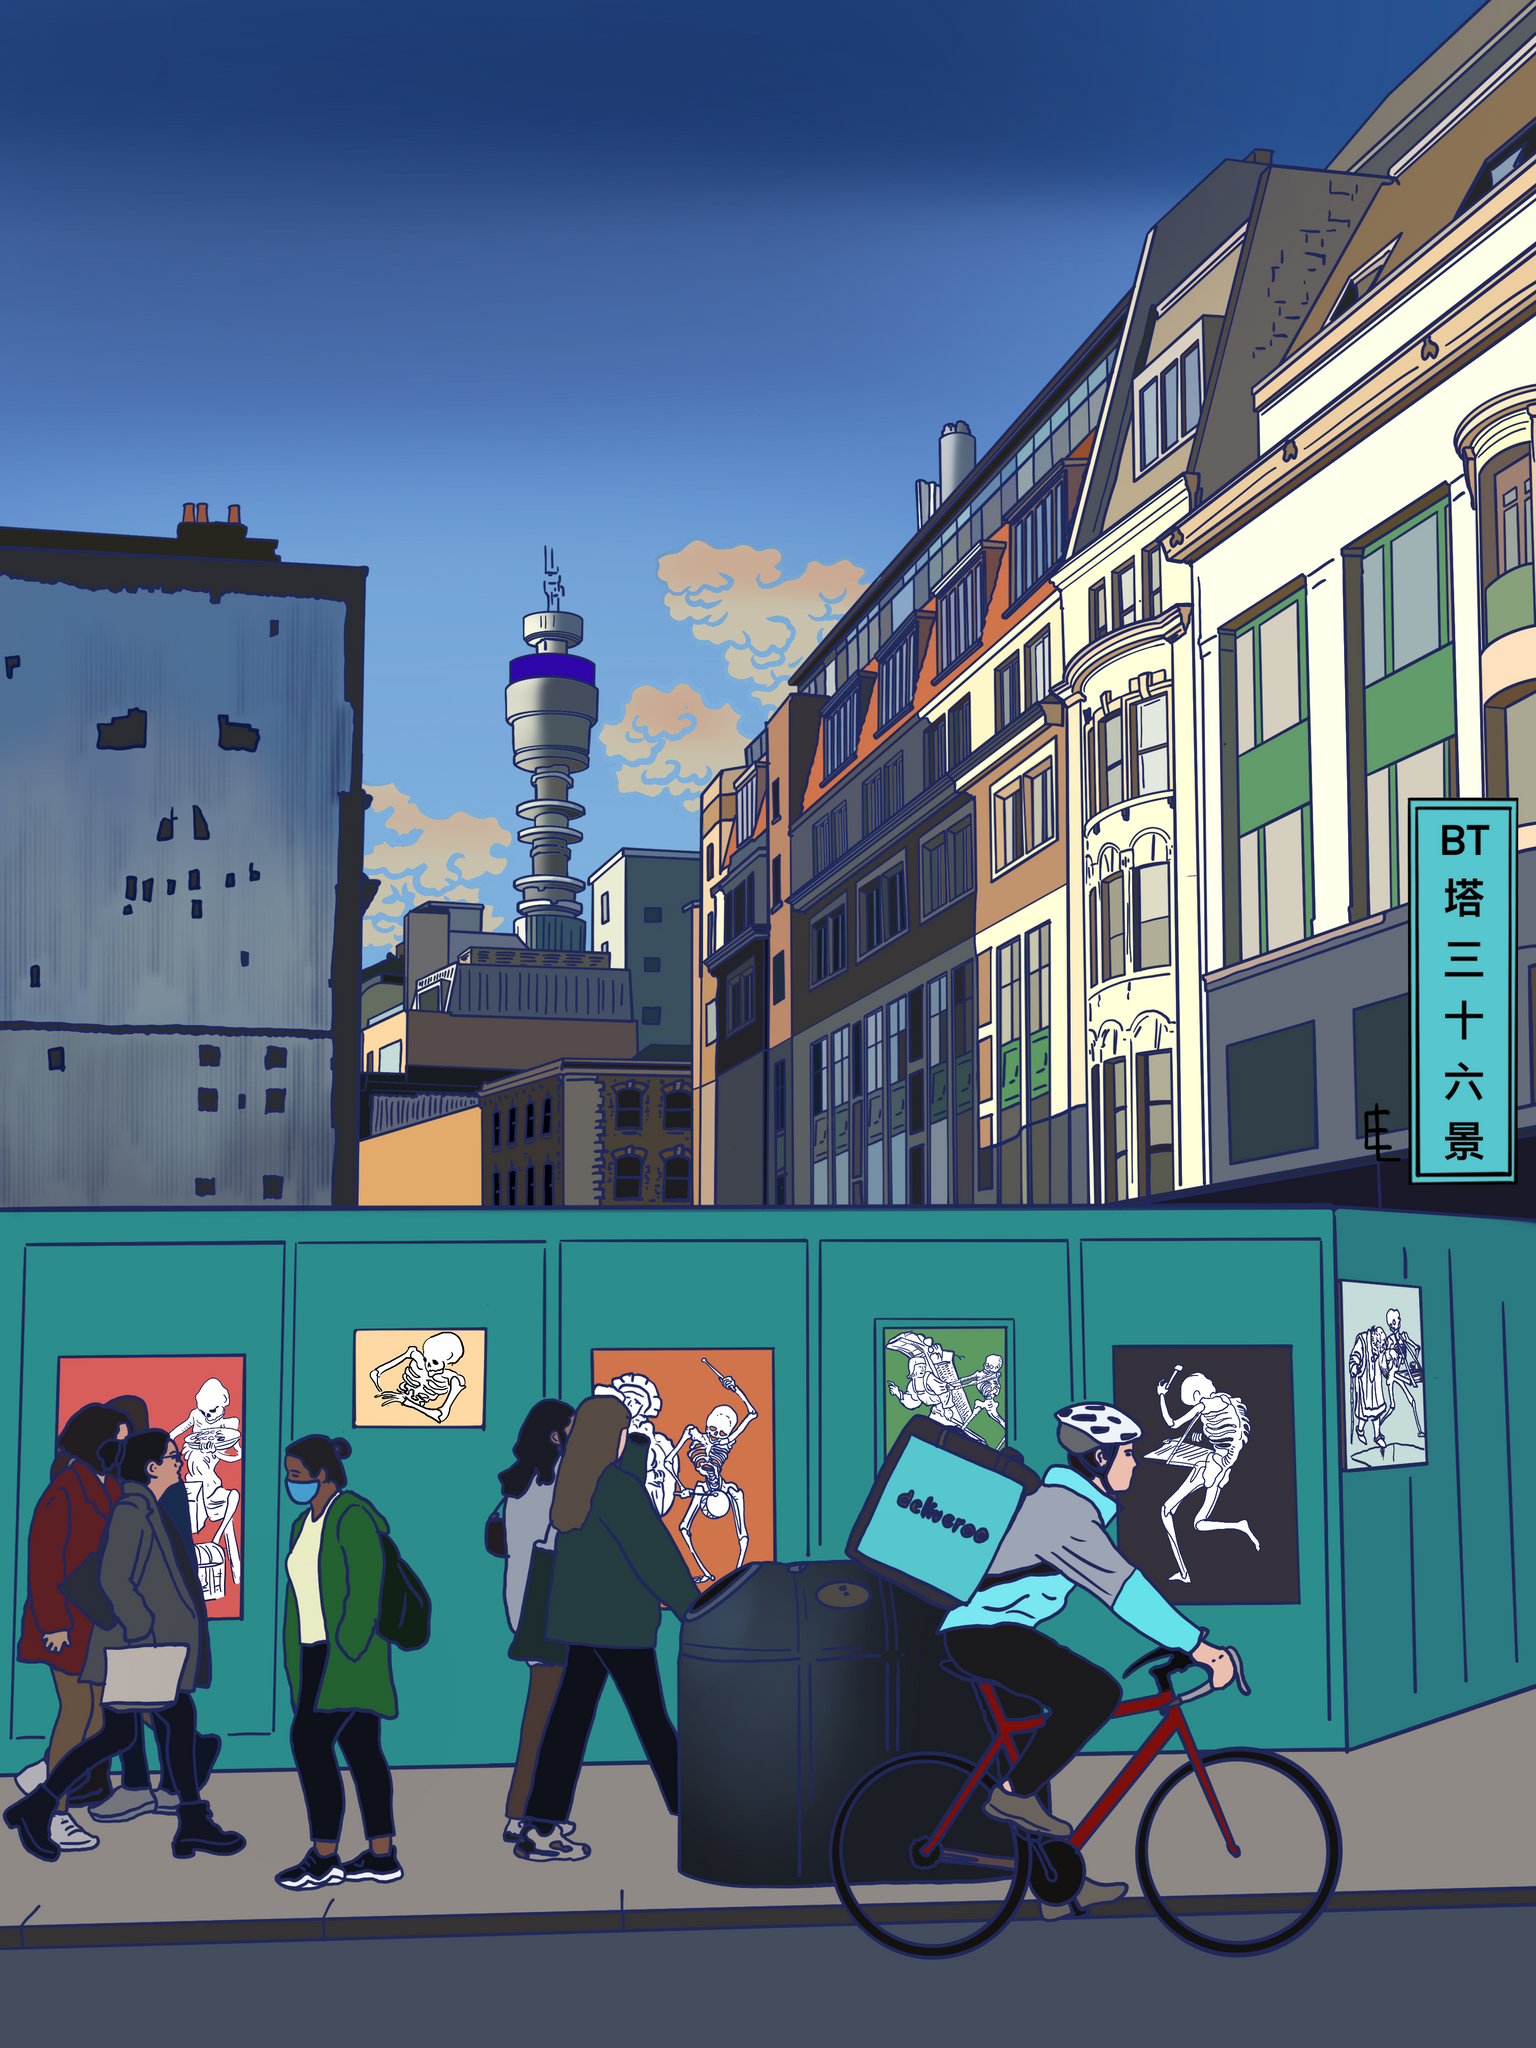 ‘Holbein's Dance Of Death’: BT Tower From Oxford Street